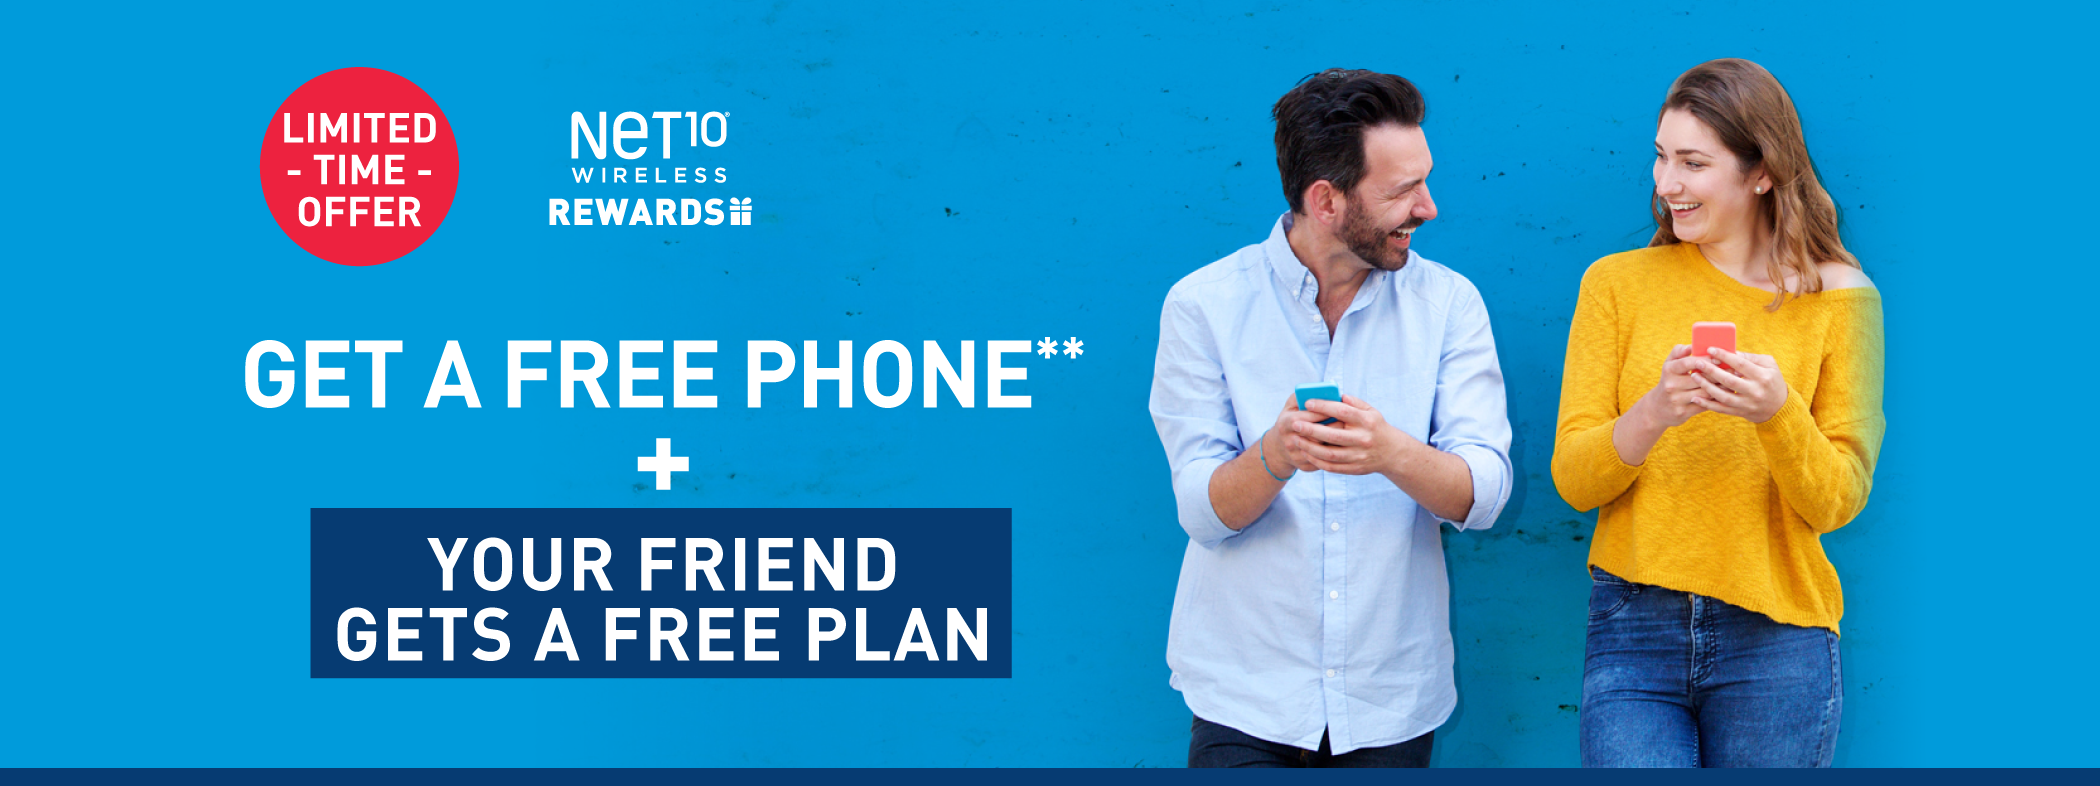 GET A FREE PHONE & YOUR FRIEND GETS A FREE PLAN